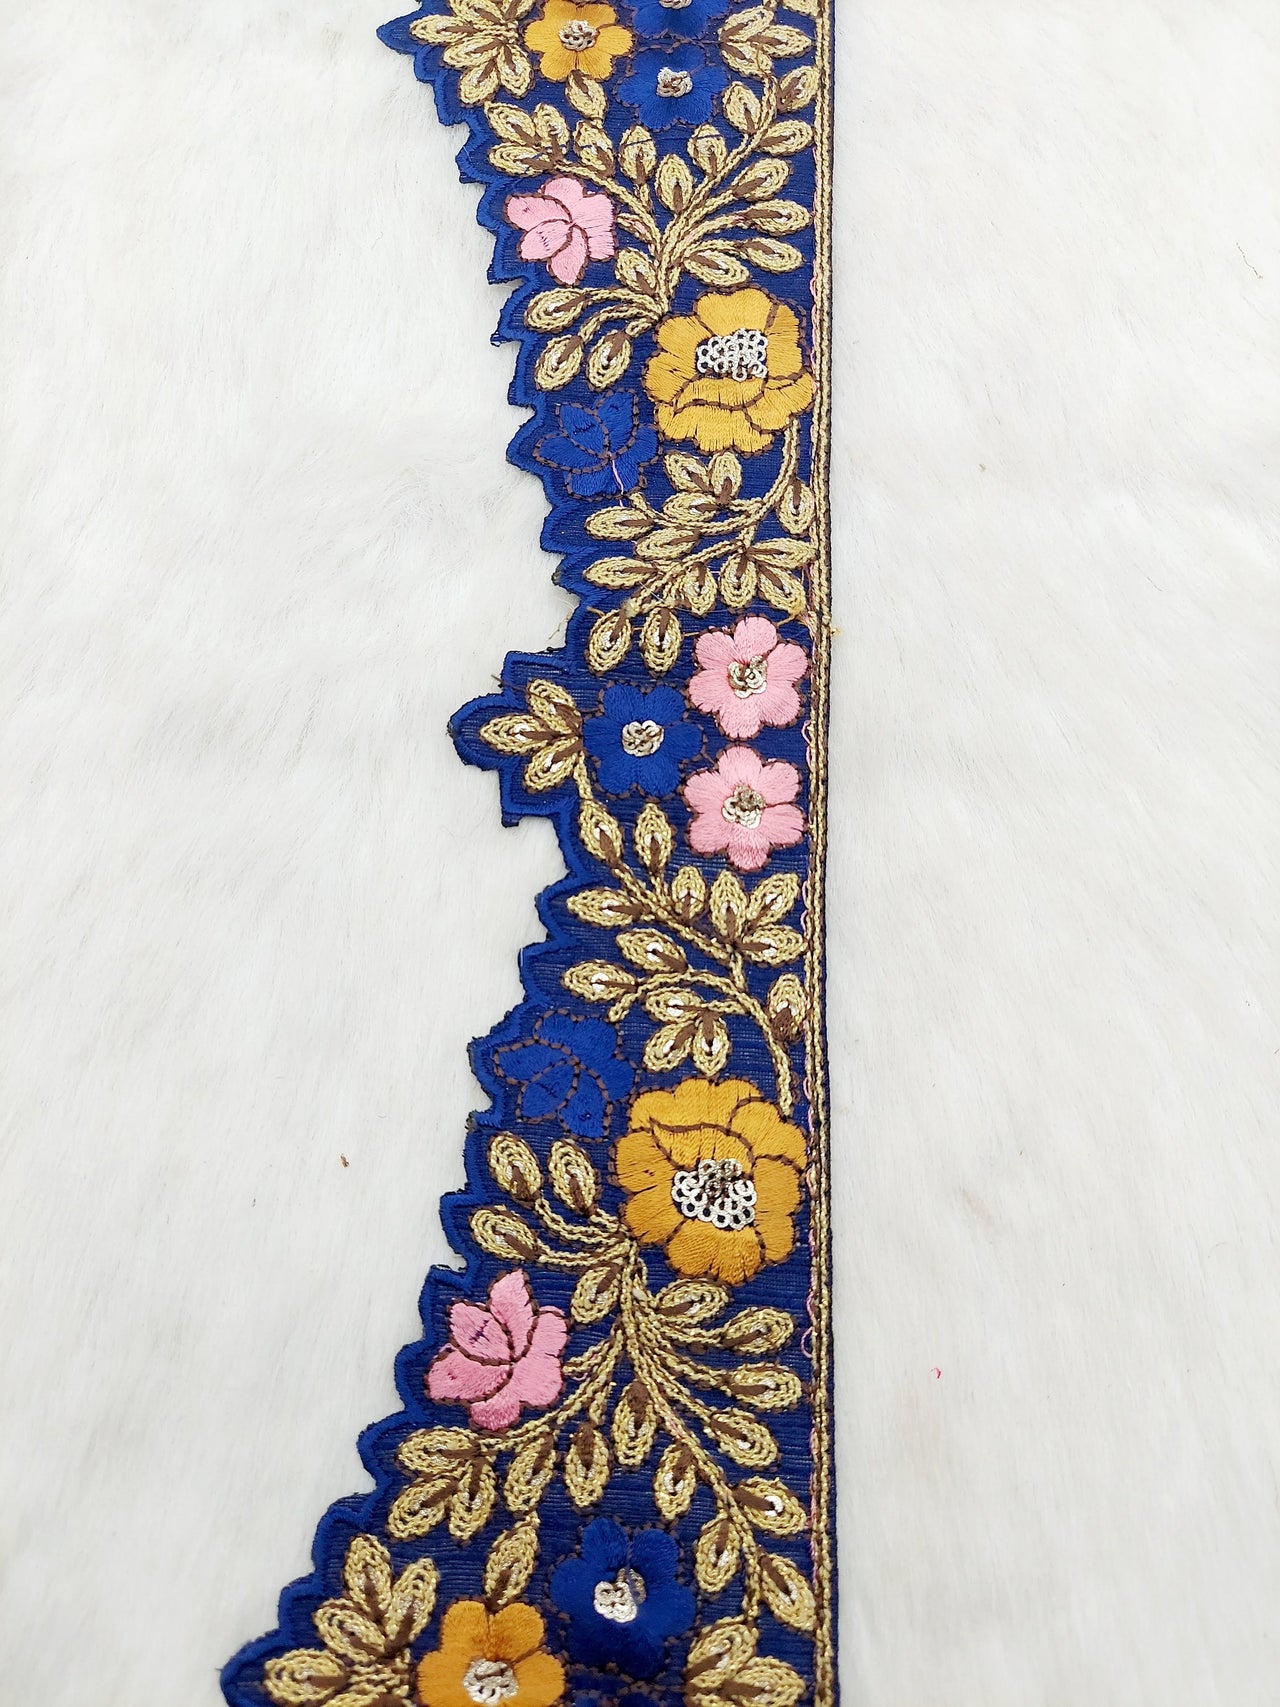 Art Silk Hand Embroidered Cutwork Lace Trim In Gold Floral Embroidery, Sari Border, Trim by Yard